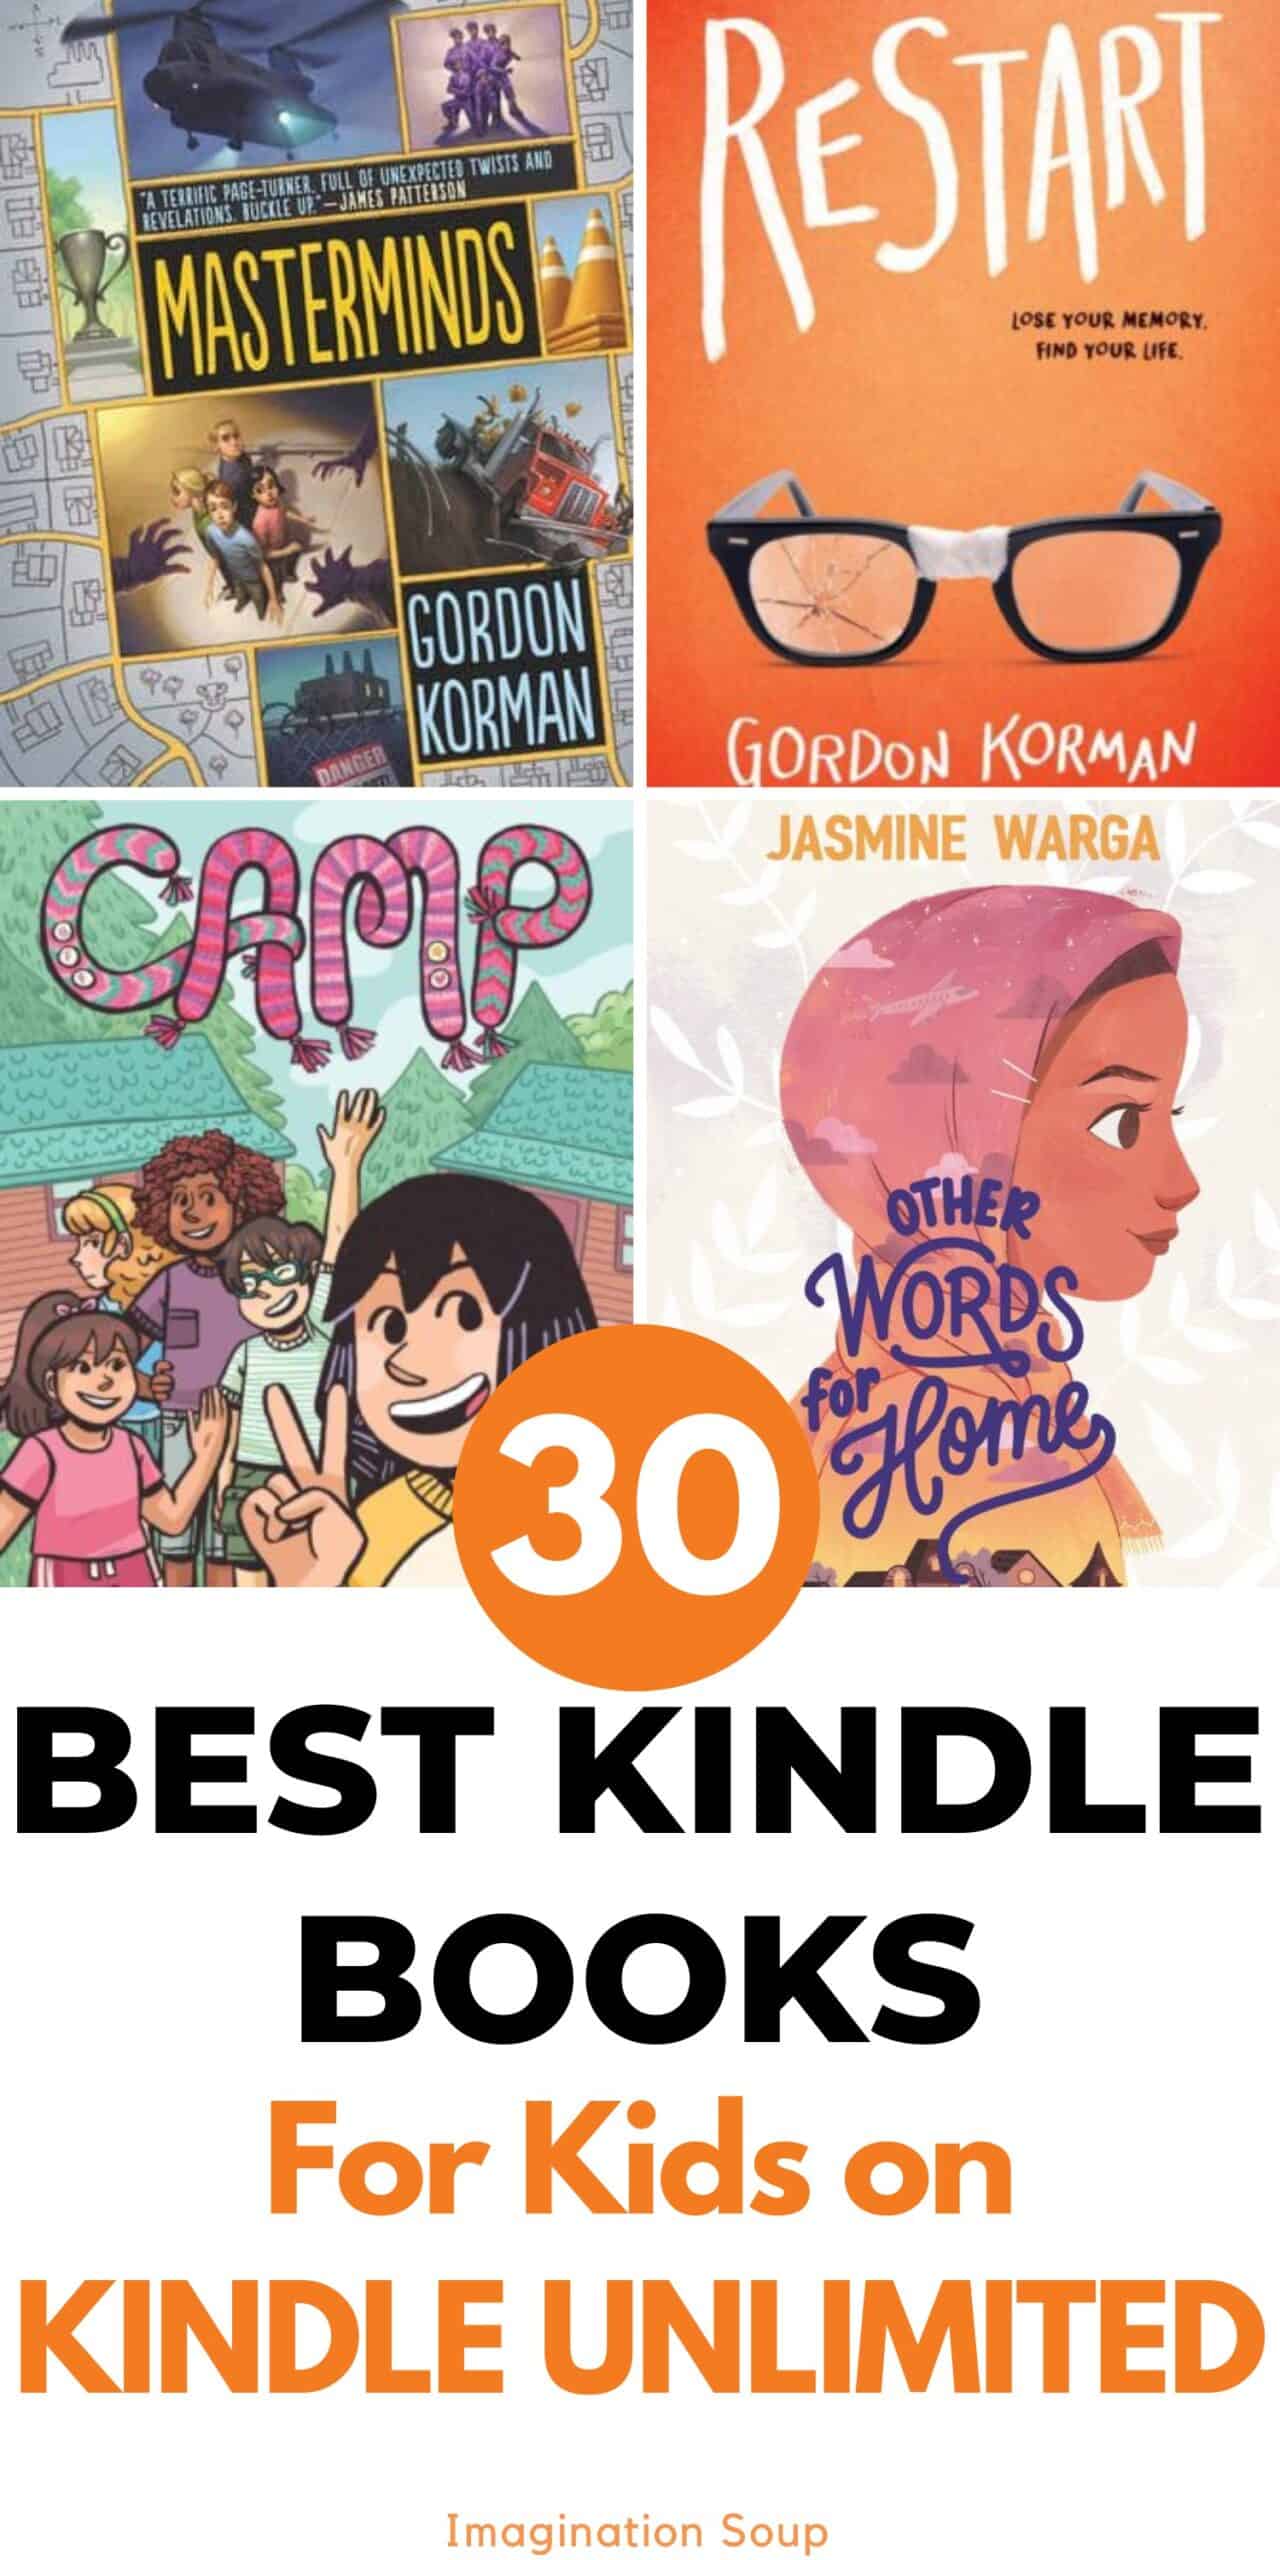 30 best kindle books for kids on Kindle Unlimited